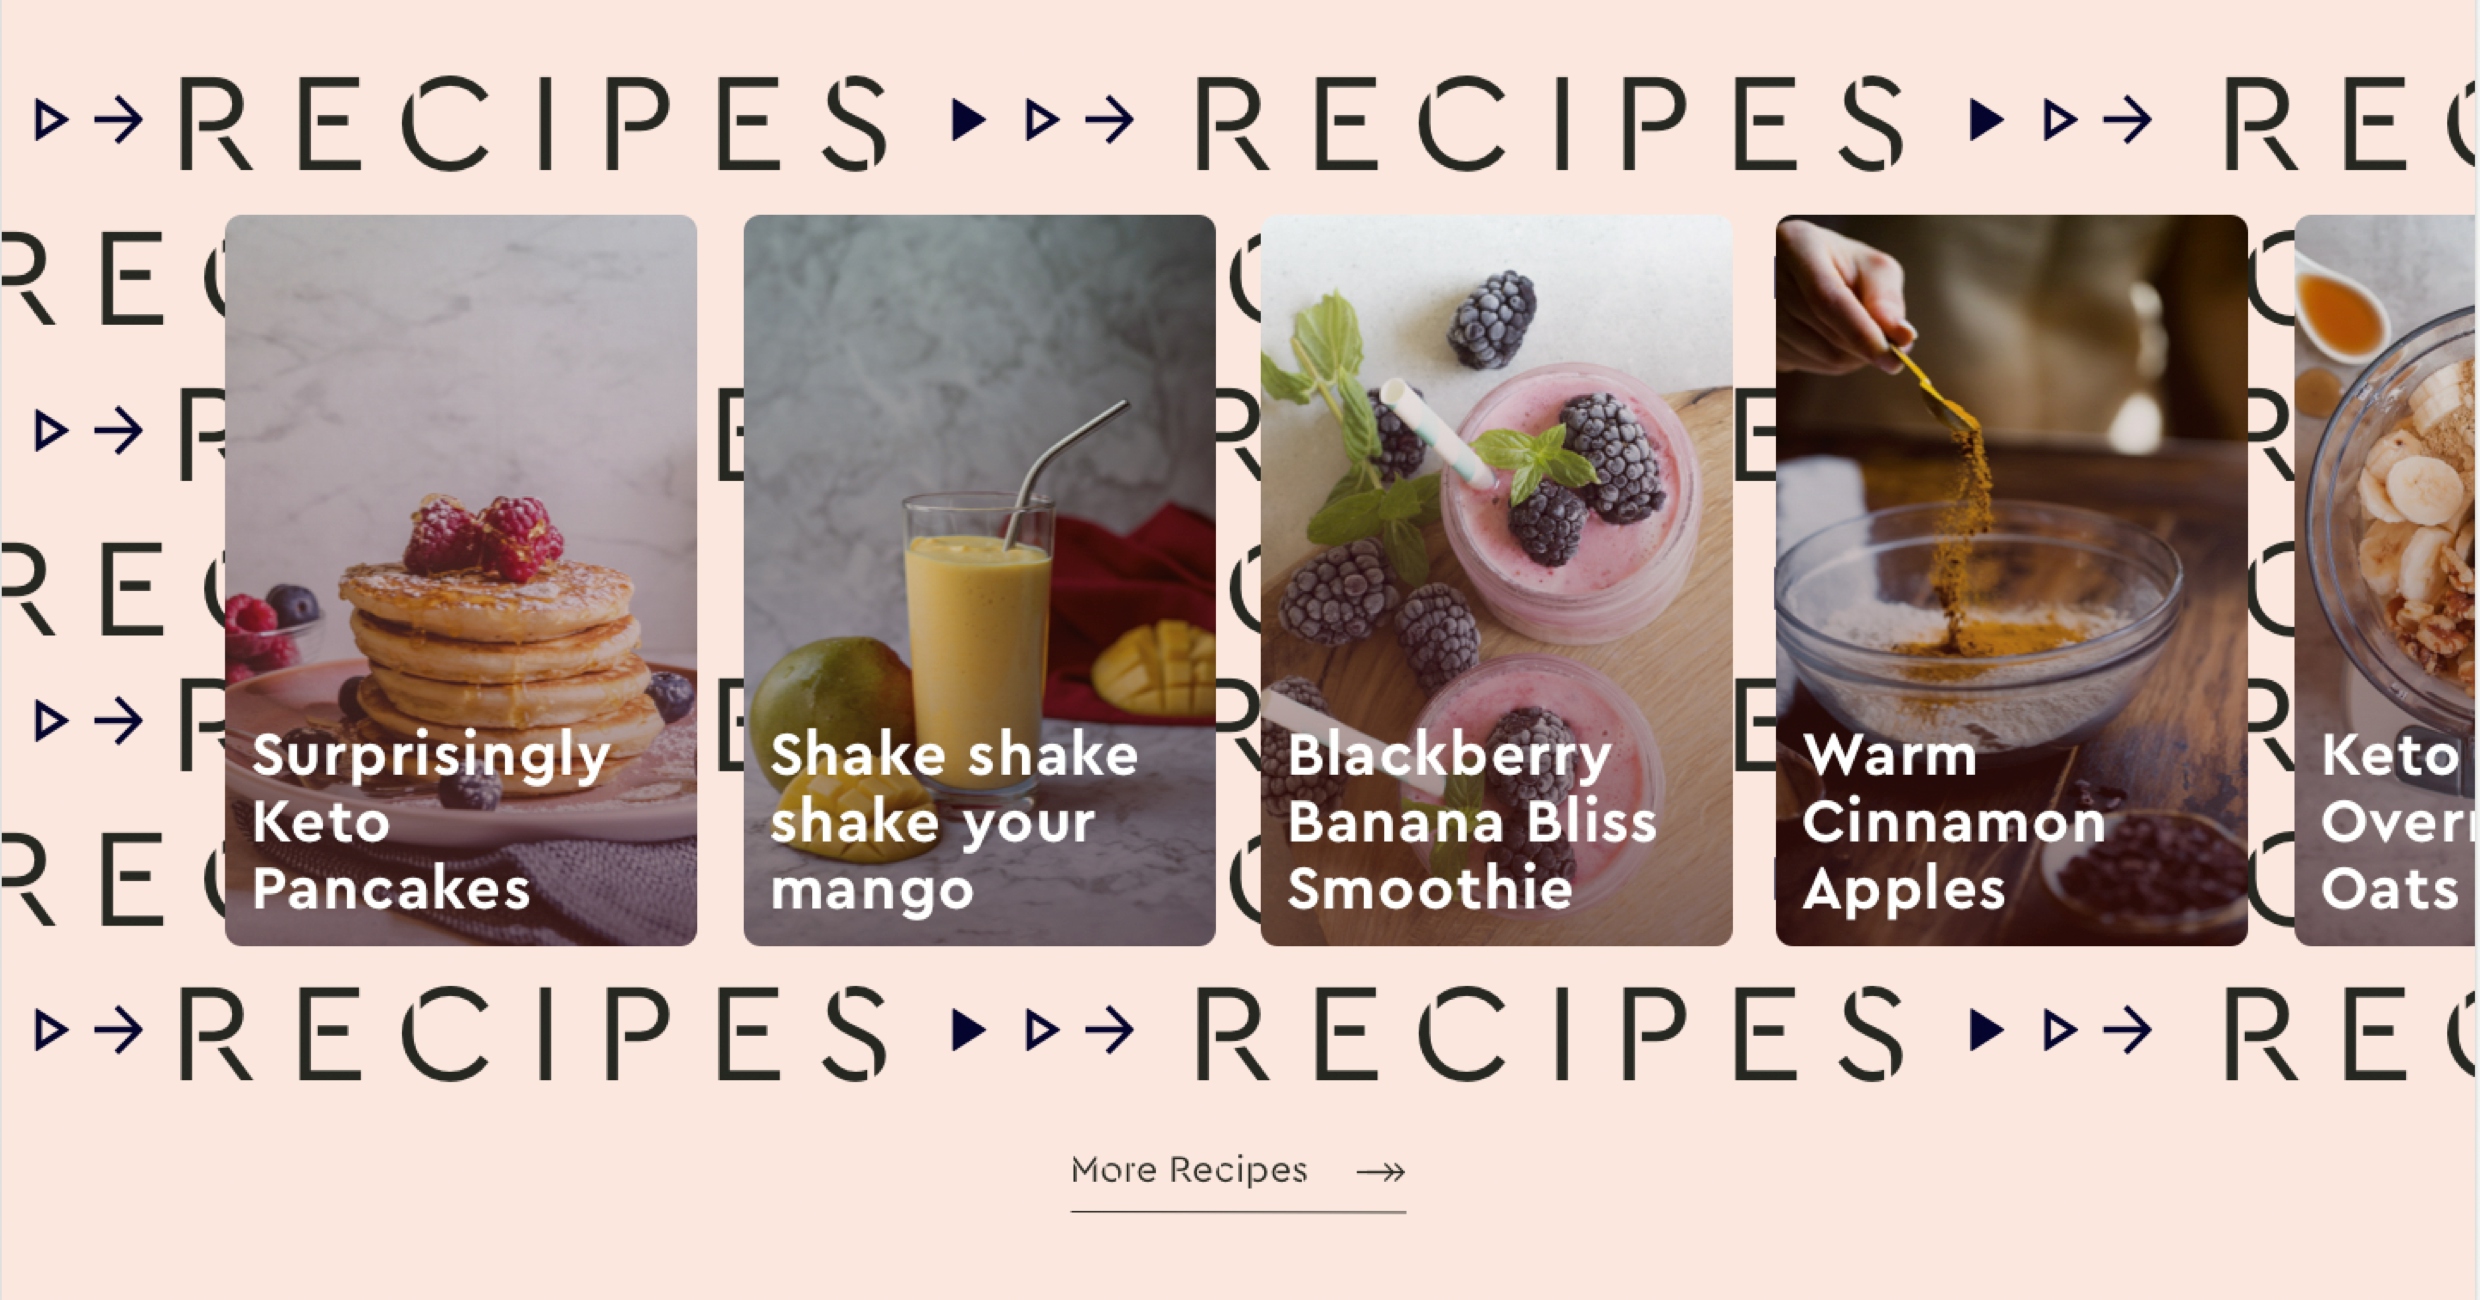 A dusky pink ground with “recipes” text is overlaid with five images of a food item with the recipe name on it: “Surprisingly Keto Pancakes”, “Shake shake shake your mango”, “Blackberry Banana Bliss Smoothie”, “Warm Cinnamon Apples” and “Keto Overnight Oats”.